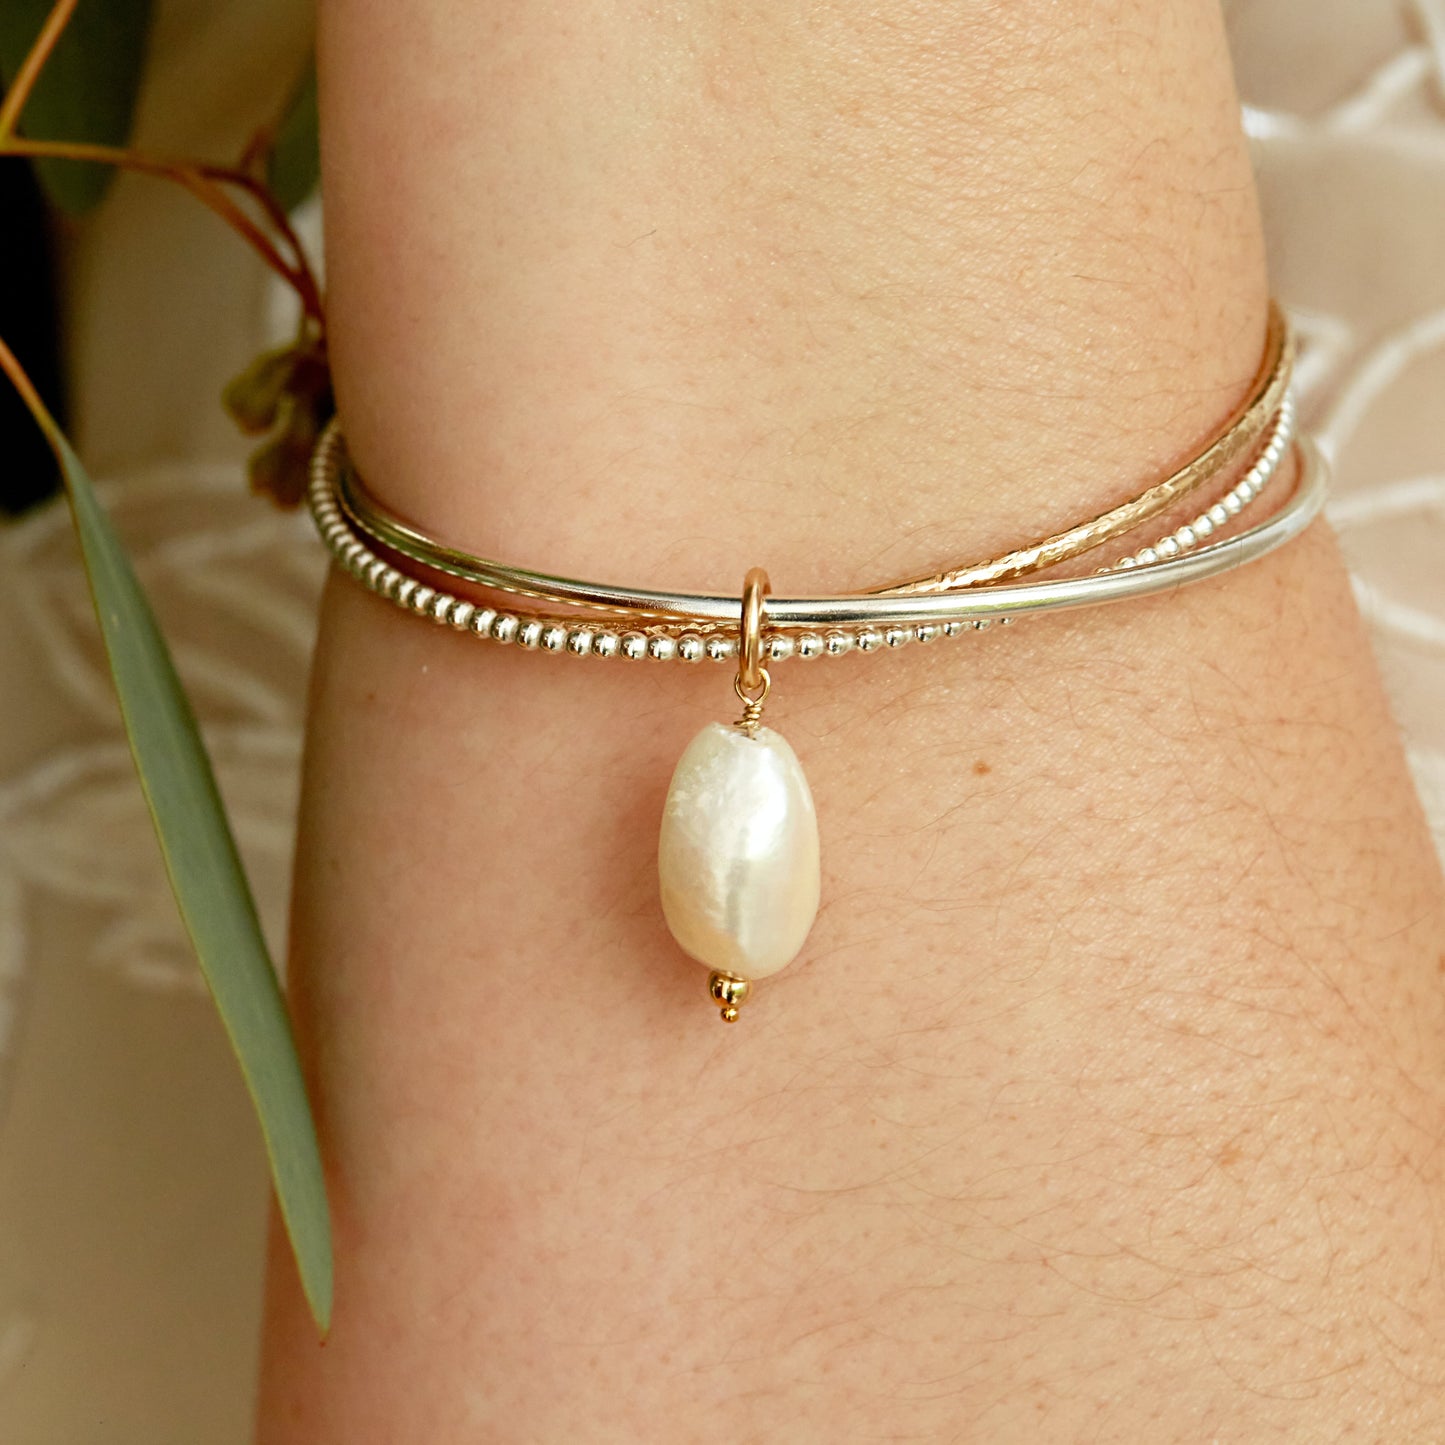 30th Wedding Anniversary Gift - 9kt Gold Triple Linked Bangle with Pearl